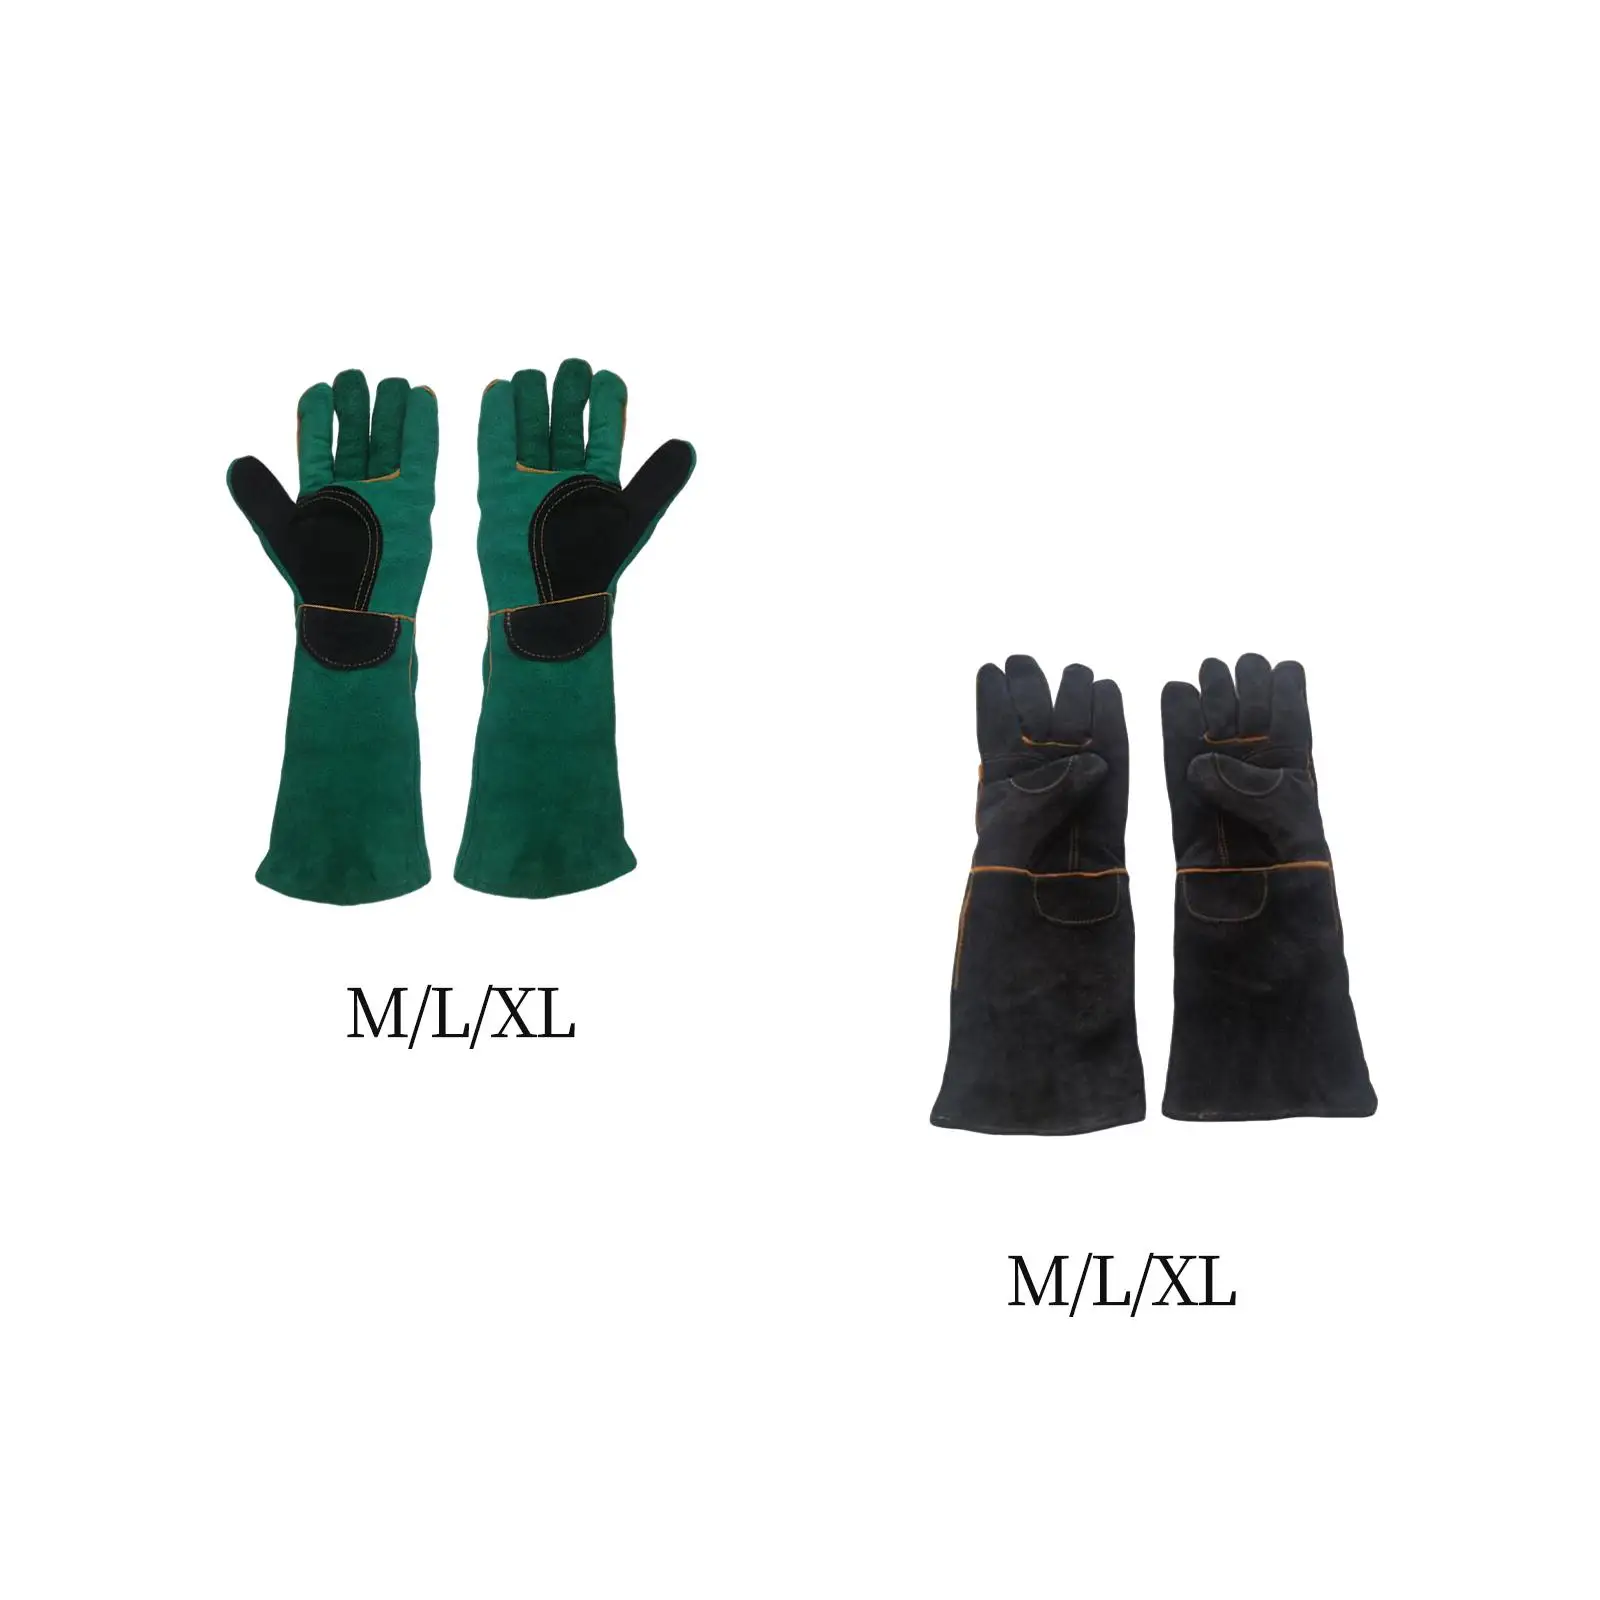 43cm Animal Handling Gloves Pet Supplies Reinforced Leather Padding Training Bite Resistant Protective for Zoo Worker Cat Dog